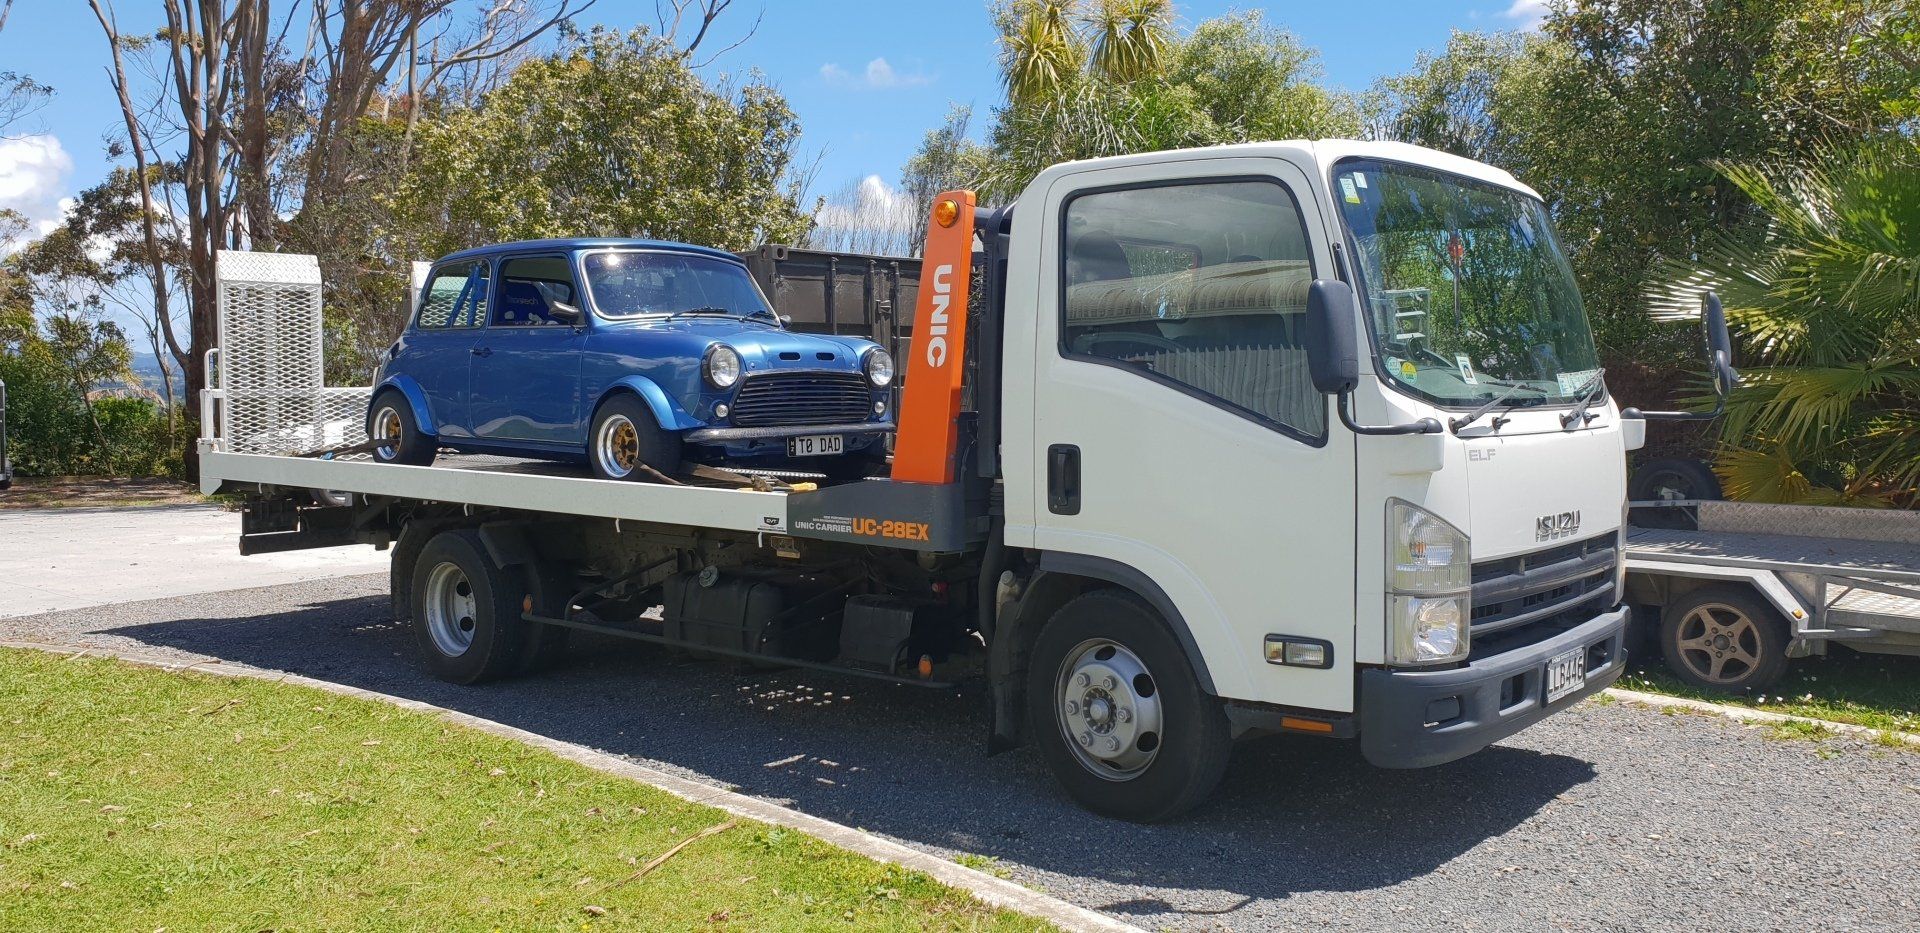 Emergency car towing services